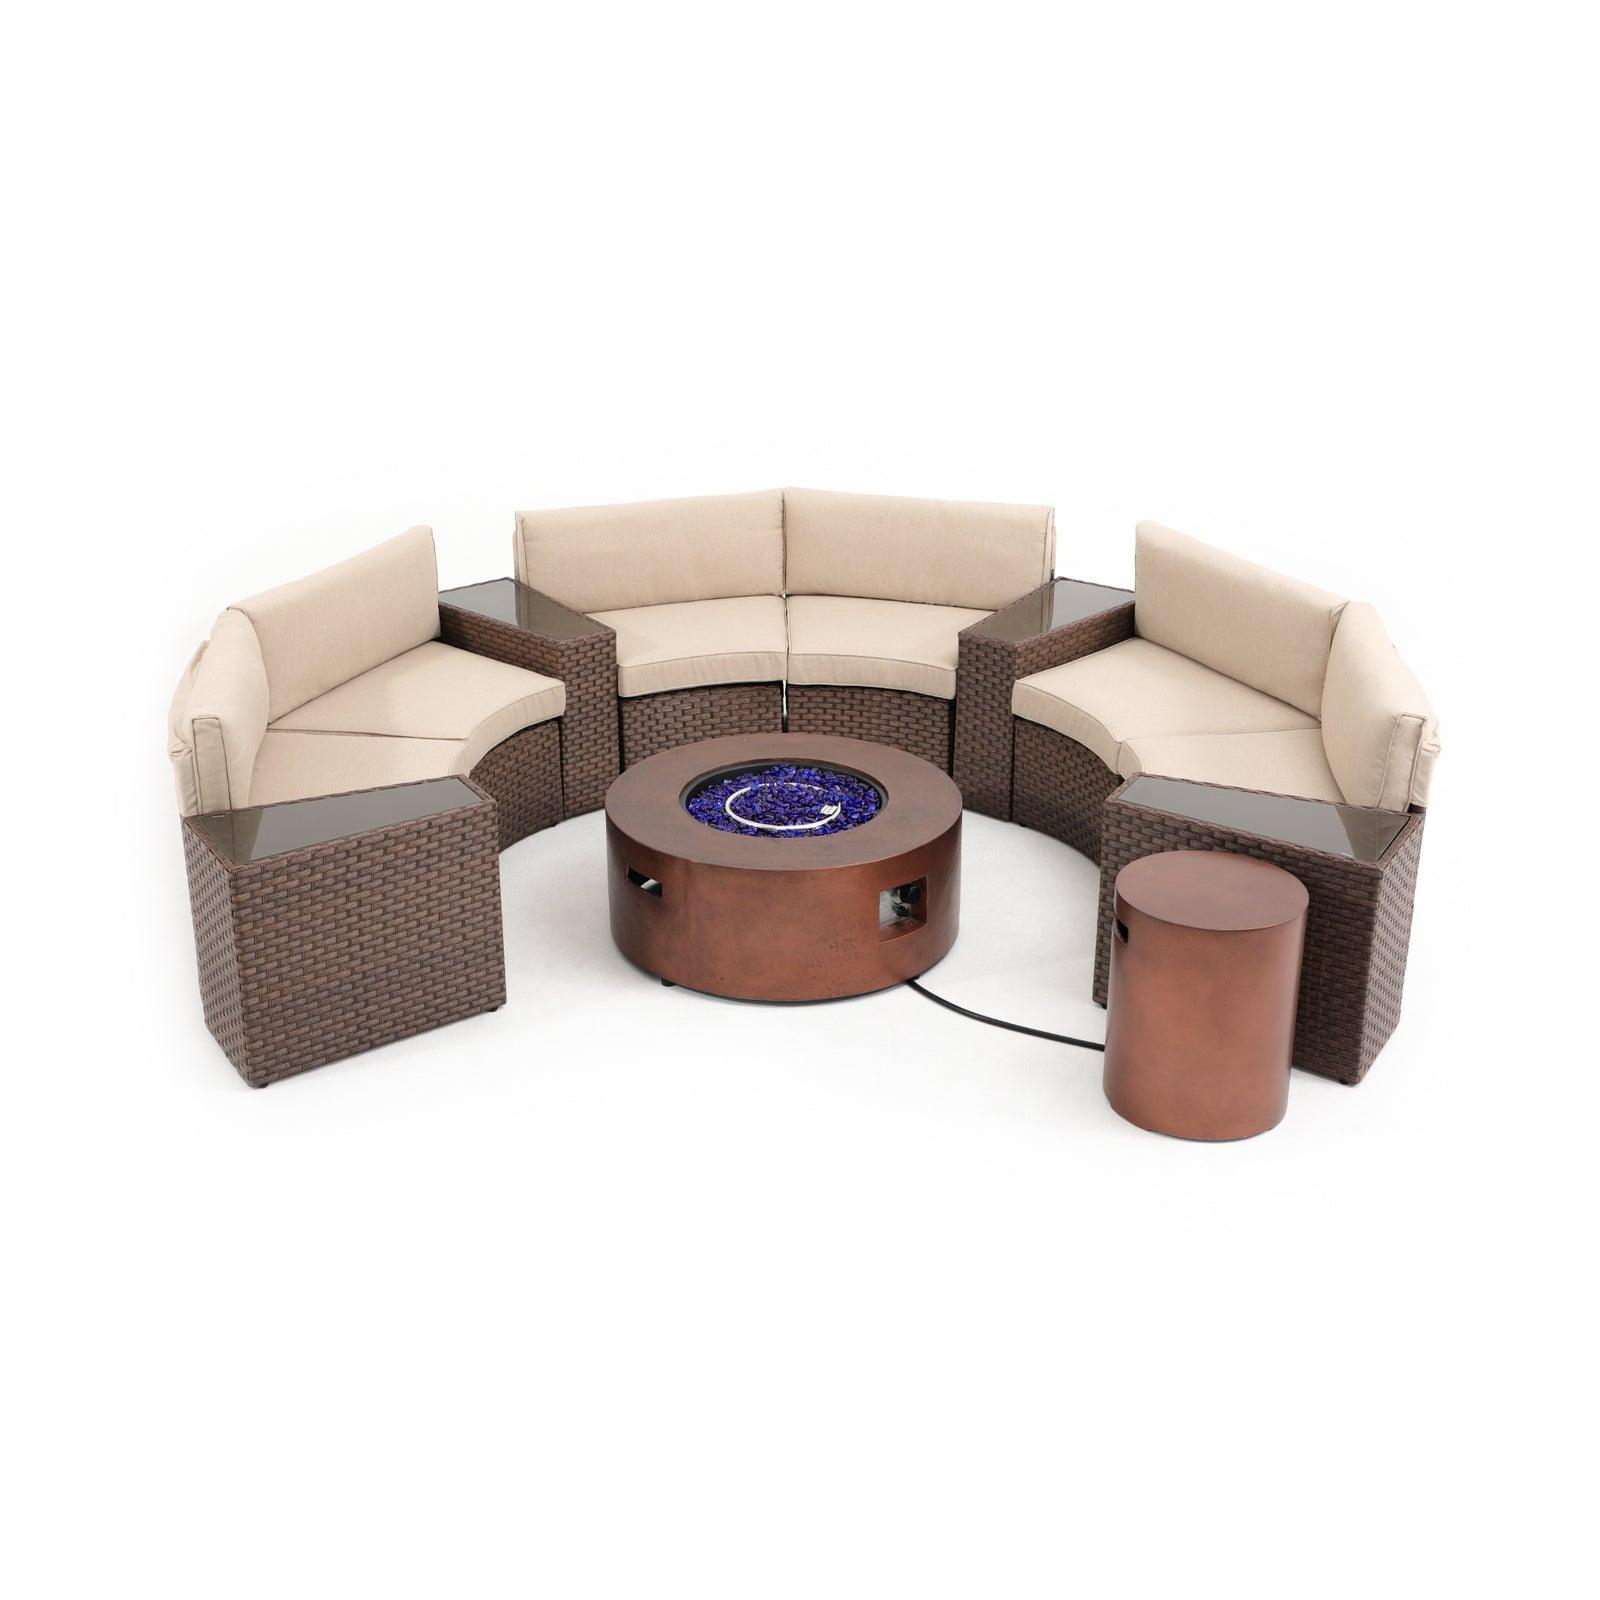 Boboli 6-seat brown Wicker Curved Sectionals with beige cushions + 4 side tables + 1 brown Propane Fire Pit with tank holder, front view - Jardina Furniture #color_Brown #piece_11-pc.